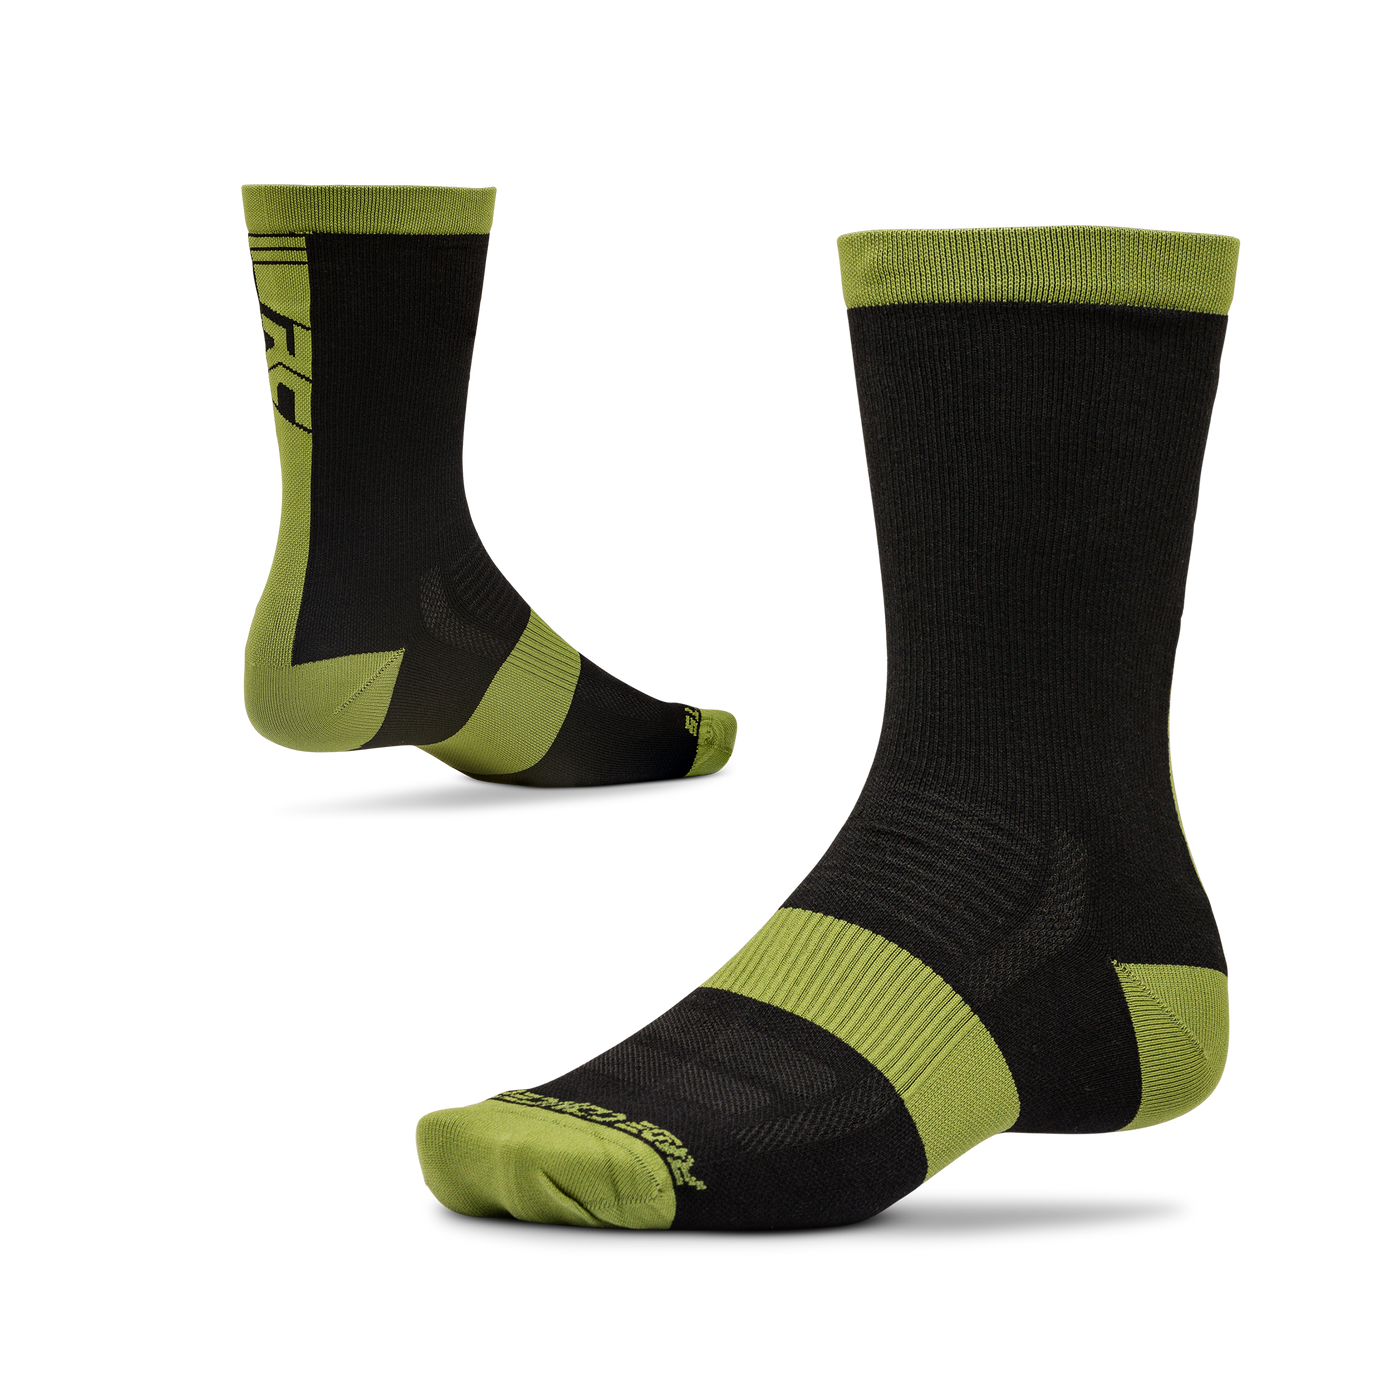 Ride Concepts Mullet MTB Sock - Wool 8" - Black and Olive